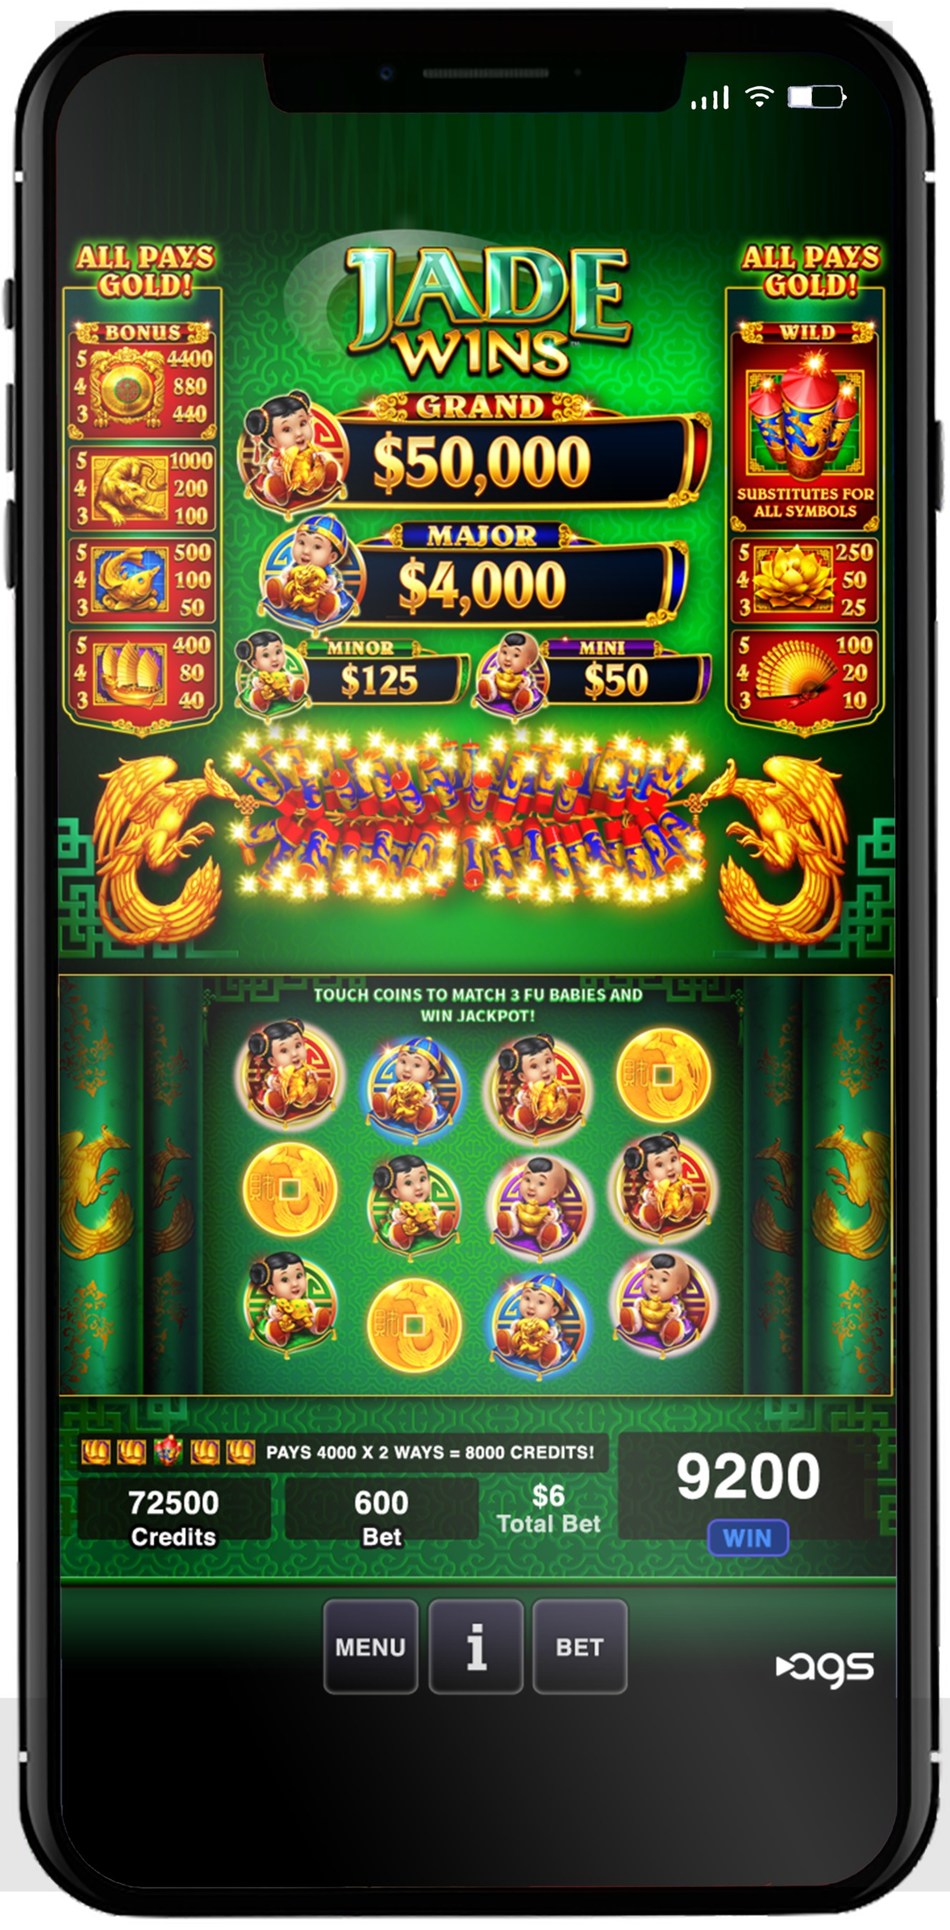 Already launched online casinos in pa real money now